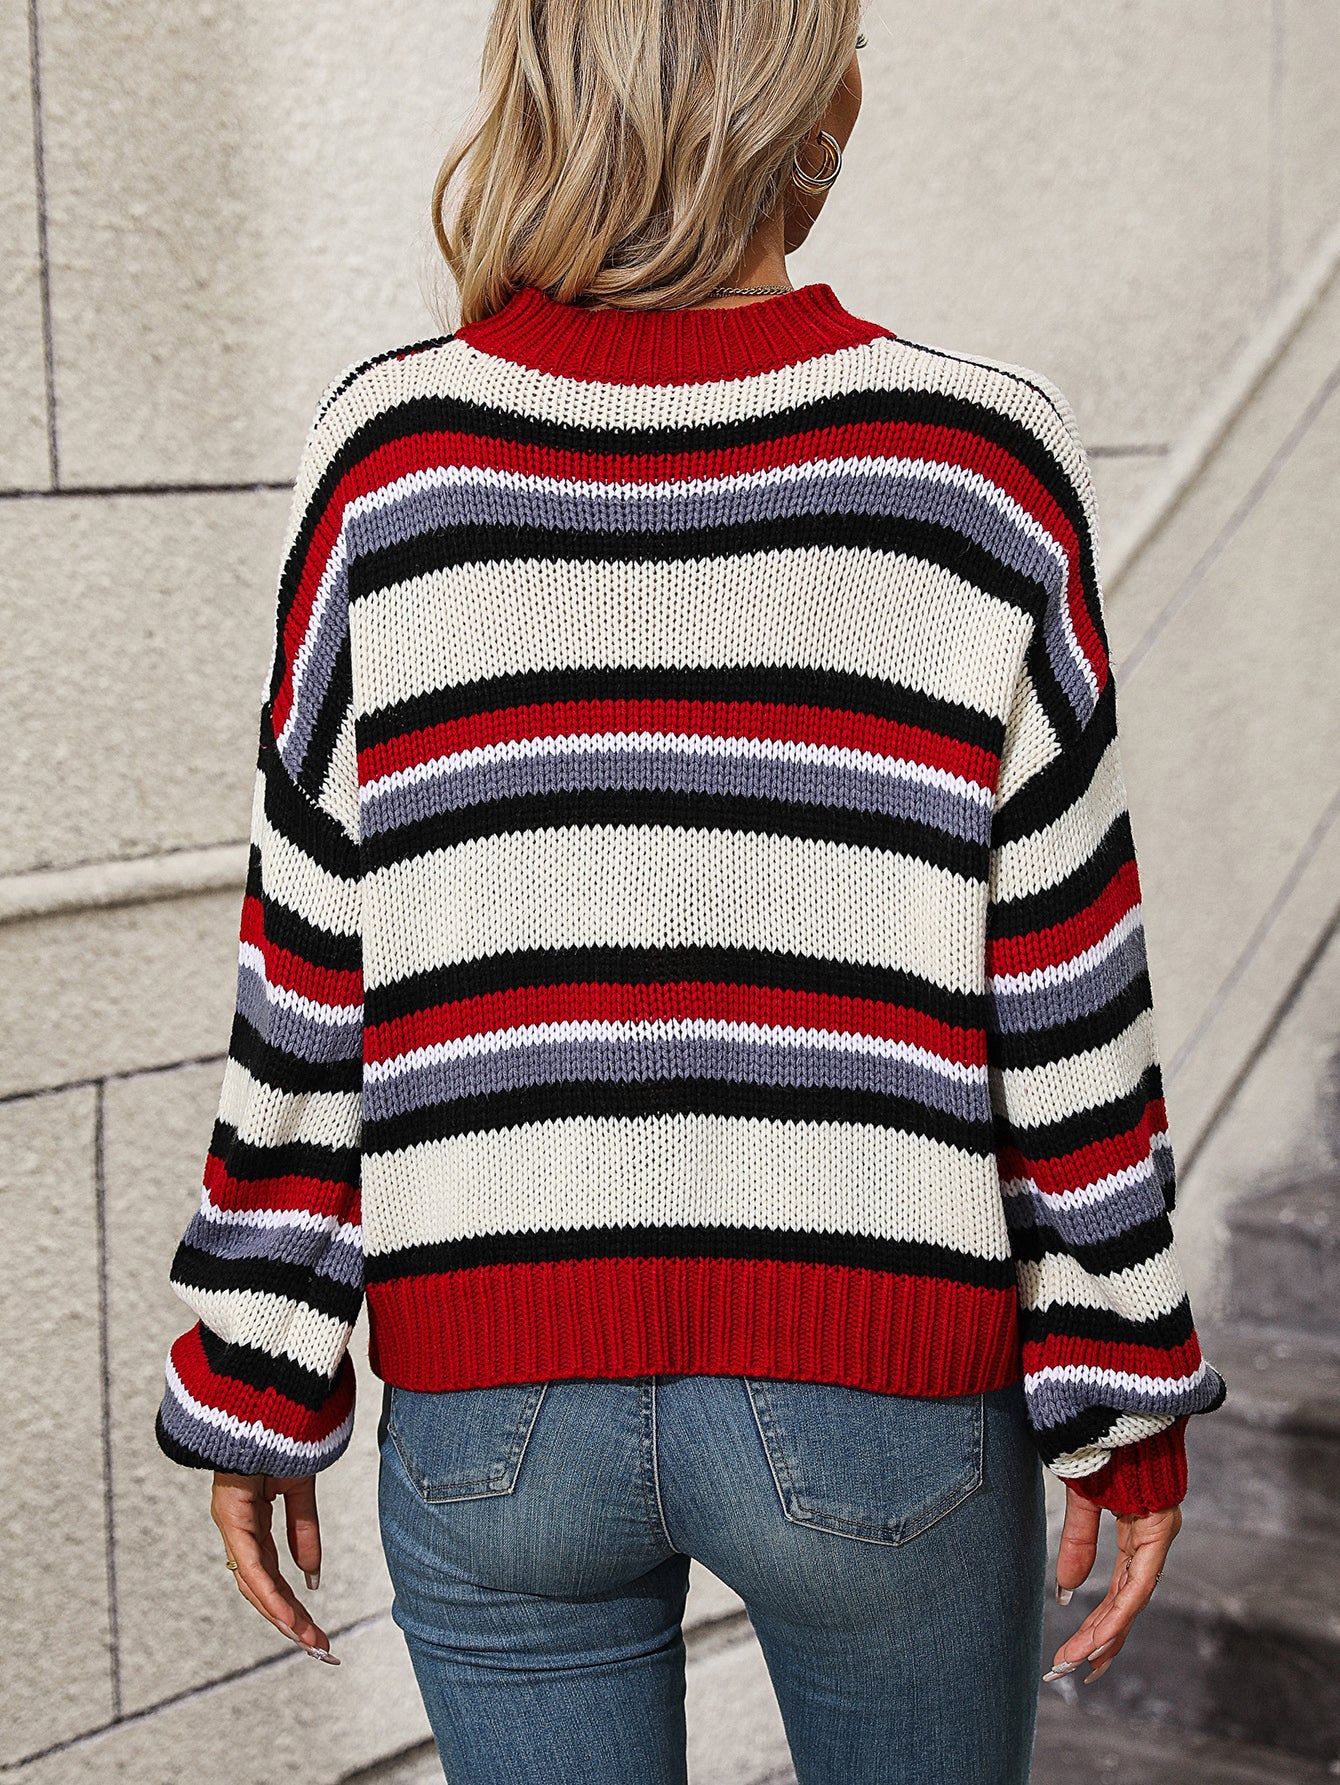 Autumn Winter Stitching Knitwear Loose Color Round Neck Striped Sweater Women